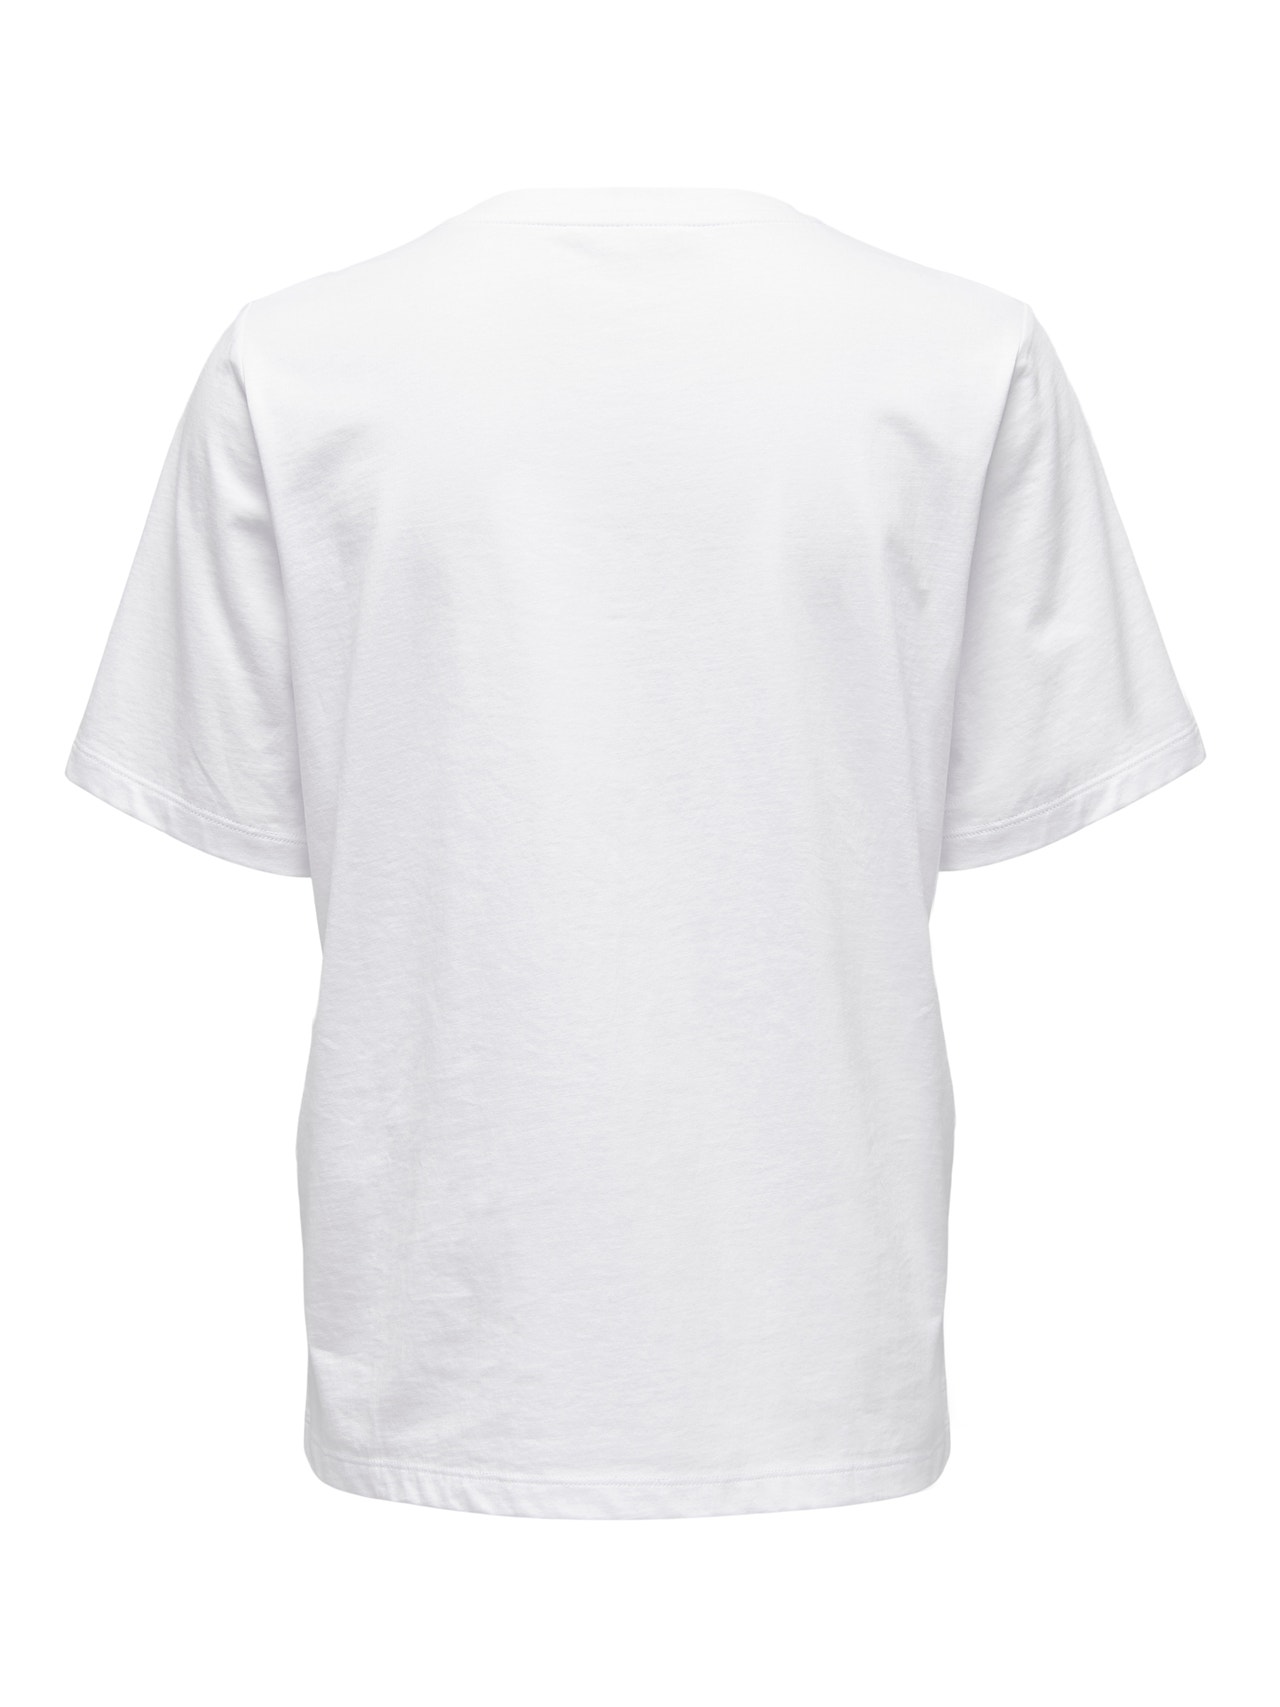 ONLY Regular Fit Round Neck T-Shirt -White - 15270390